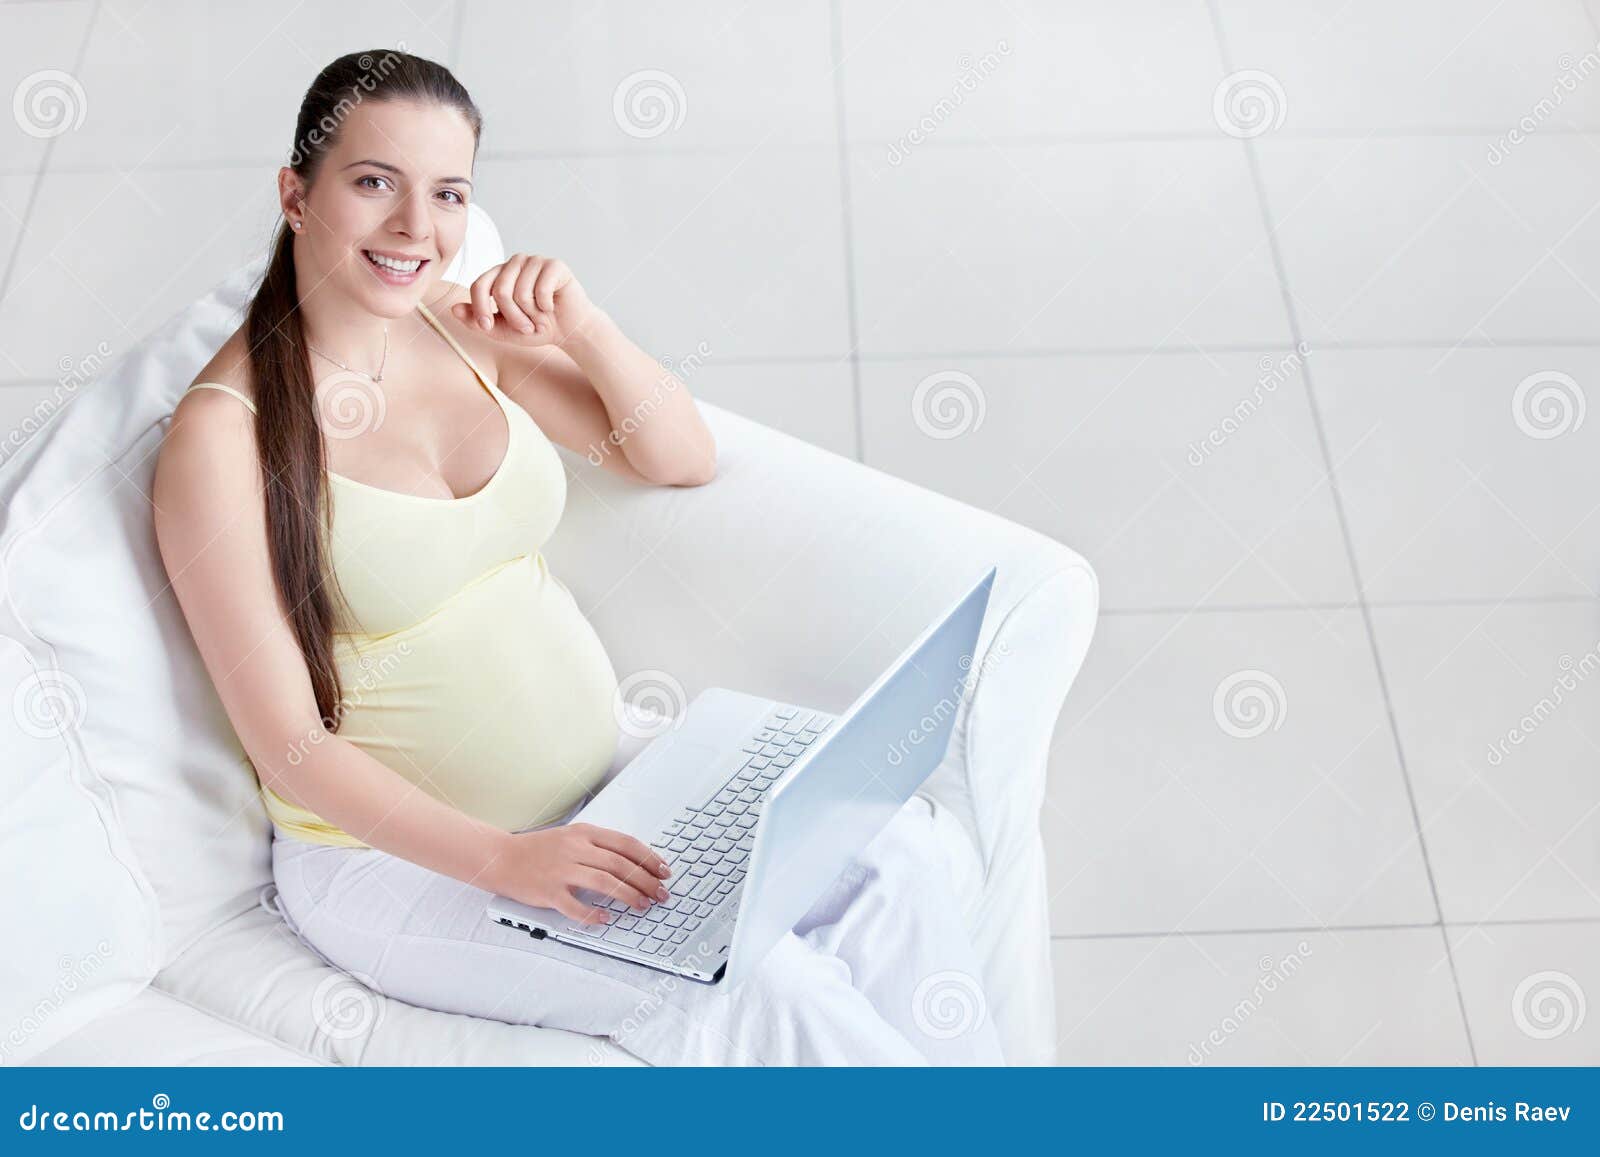 Pregnant with a laptop stock photo. Image of cheerful ...